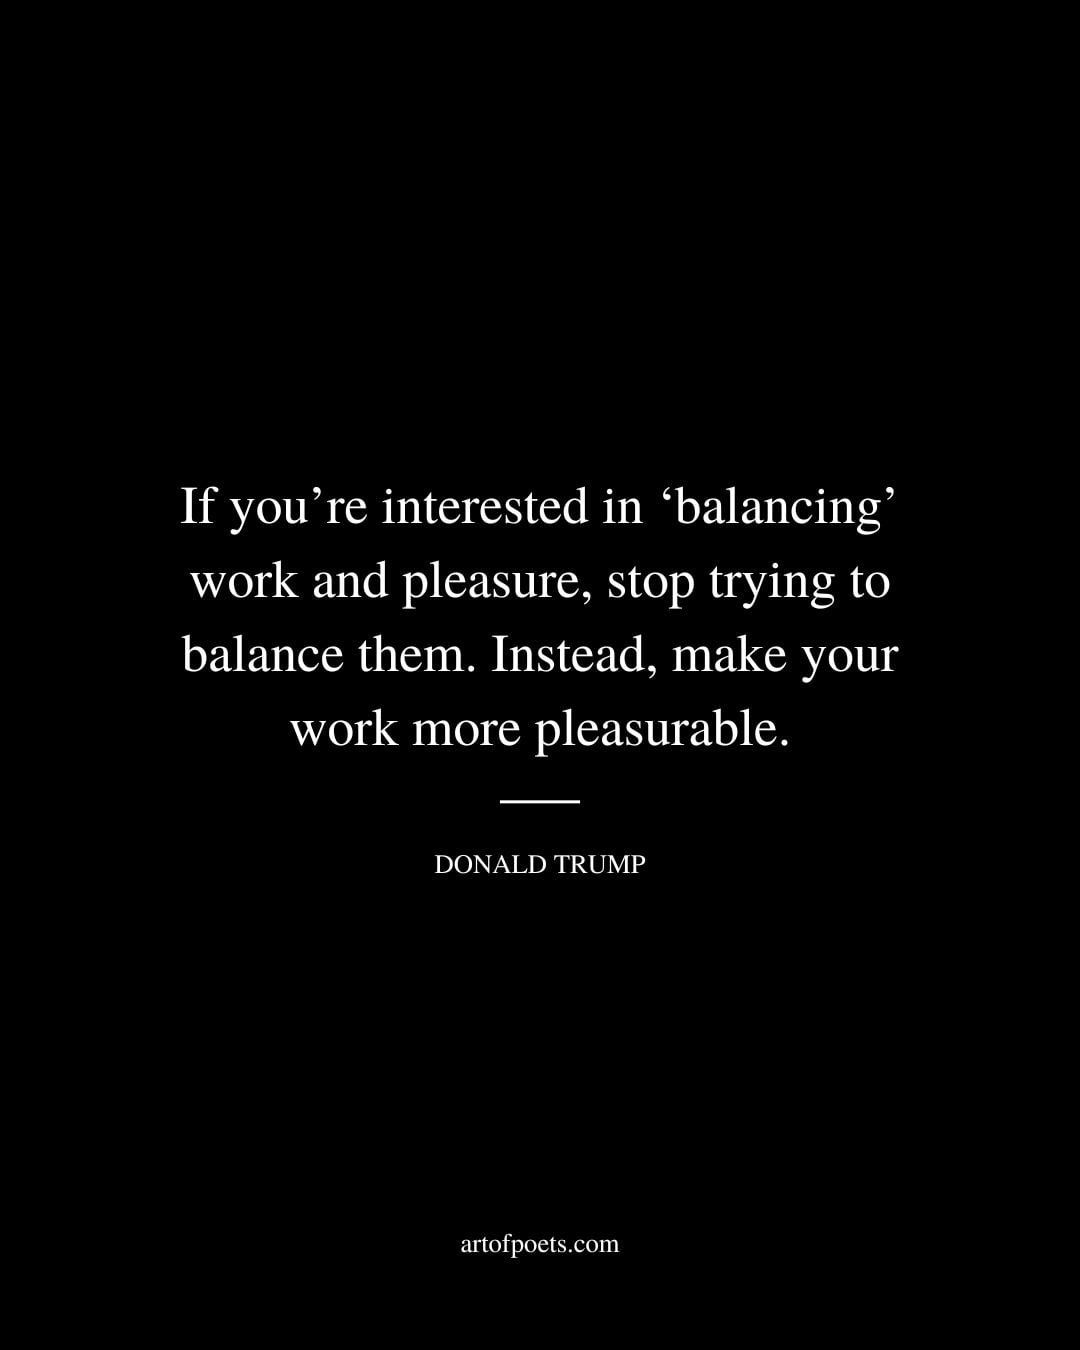 If youre interested in ‘balancing work and pleasure stop trying to balance them. Instead make your work more pleasurable